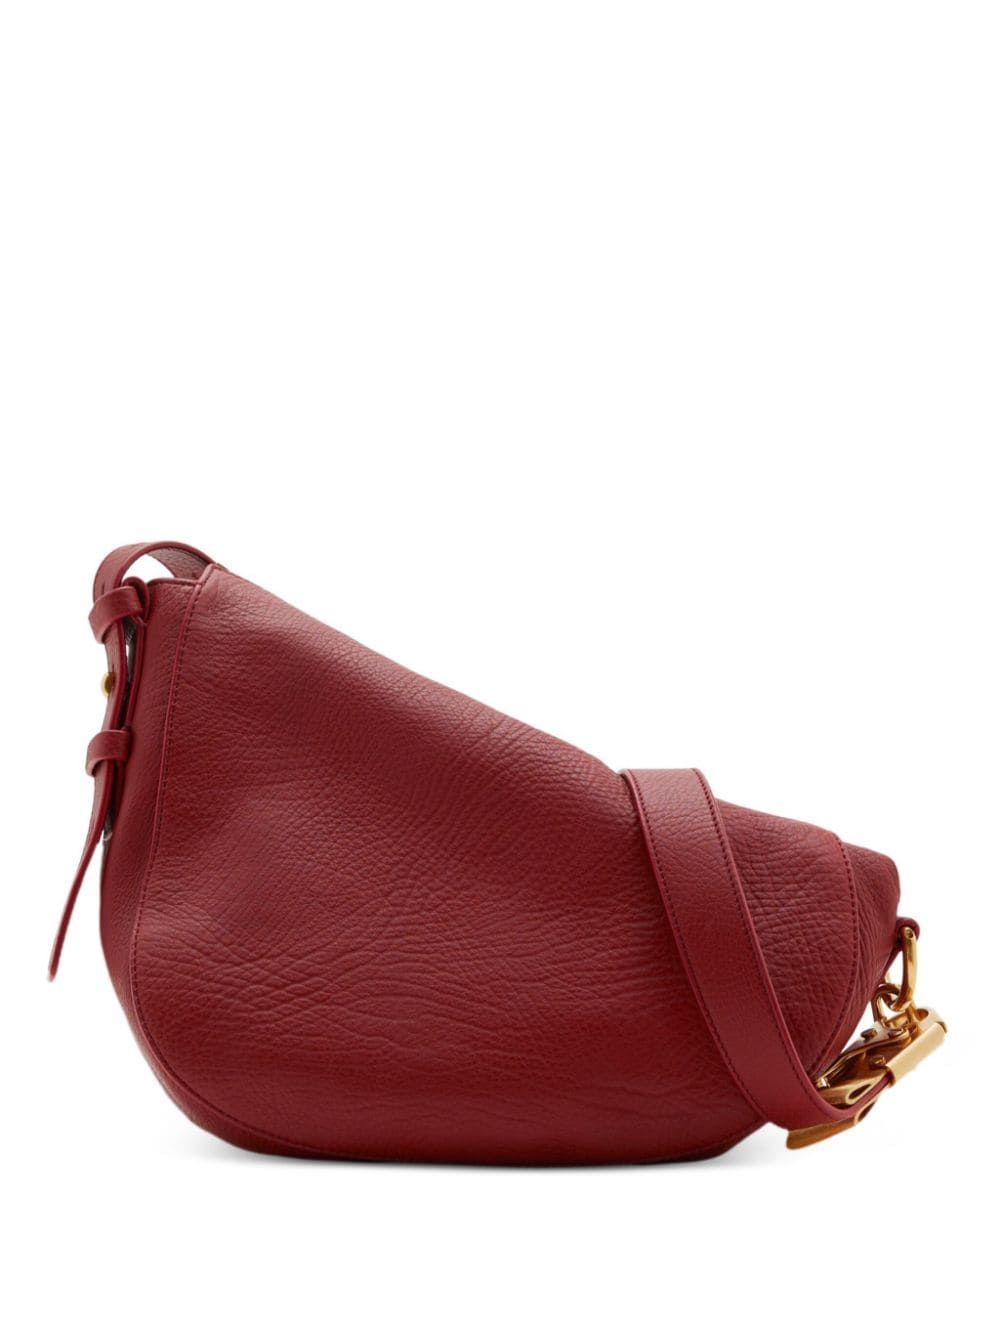 Burberry small Knight leather shoulder bag - Red von Burberry